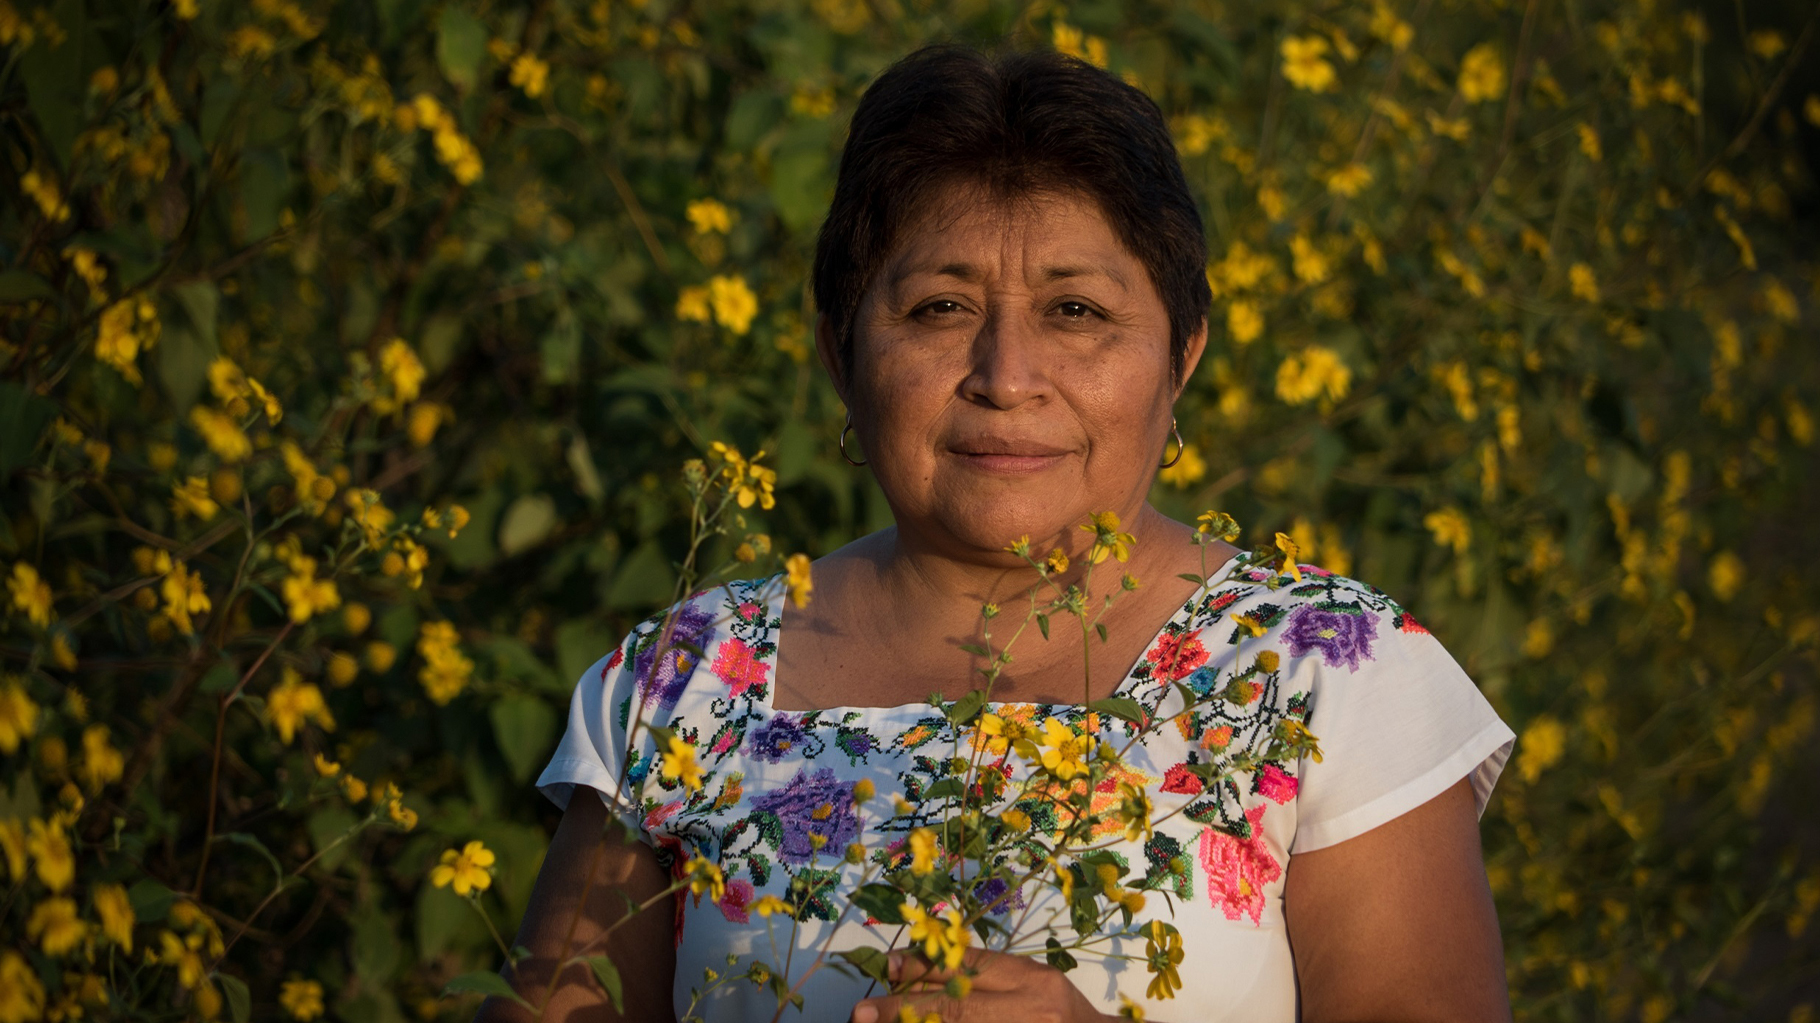 2020 Goldman Environmental Prize winner Leydy Pech surrounded by "flor de tajonal," a source of nectar for bees in the region. Image credit: Courtesy of Goldman Prize